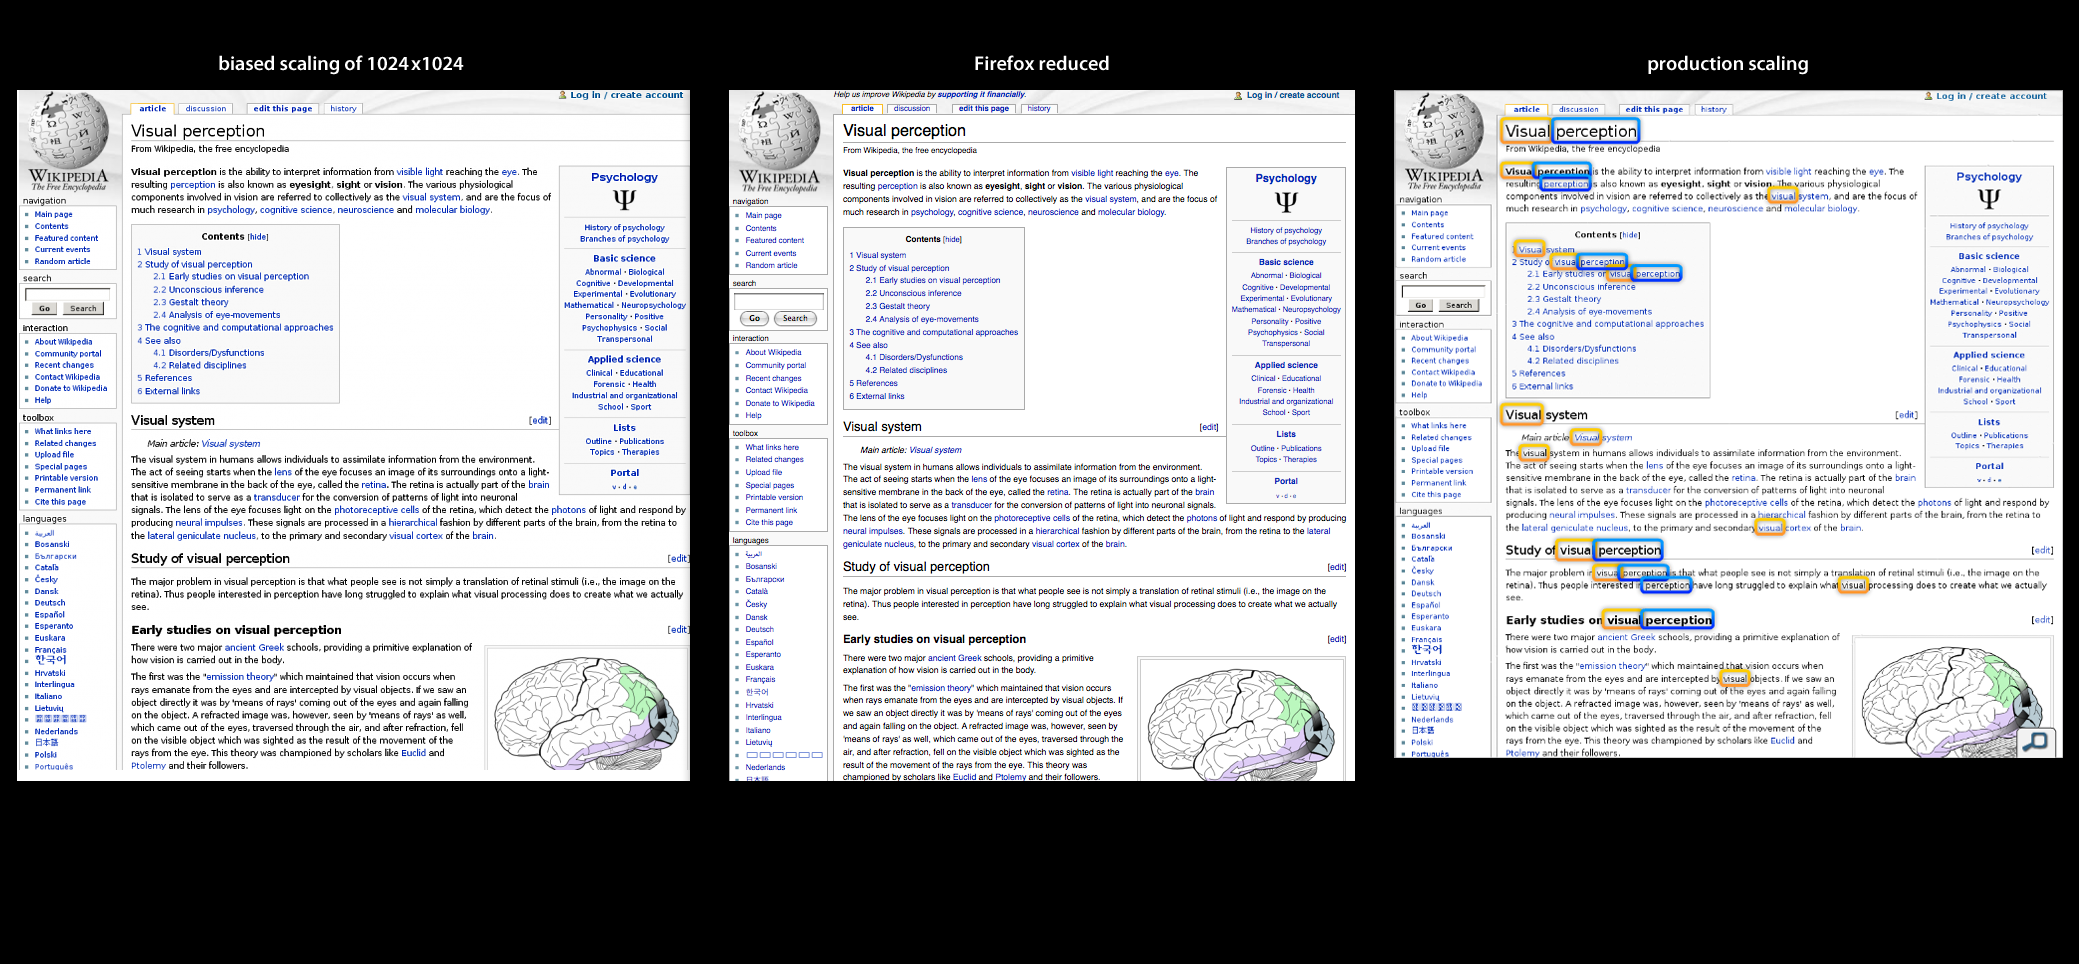 3 side by side images, left  is a bias scaling, midle is the Firefox rendering, and right is the standard searchme transformation